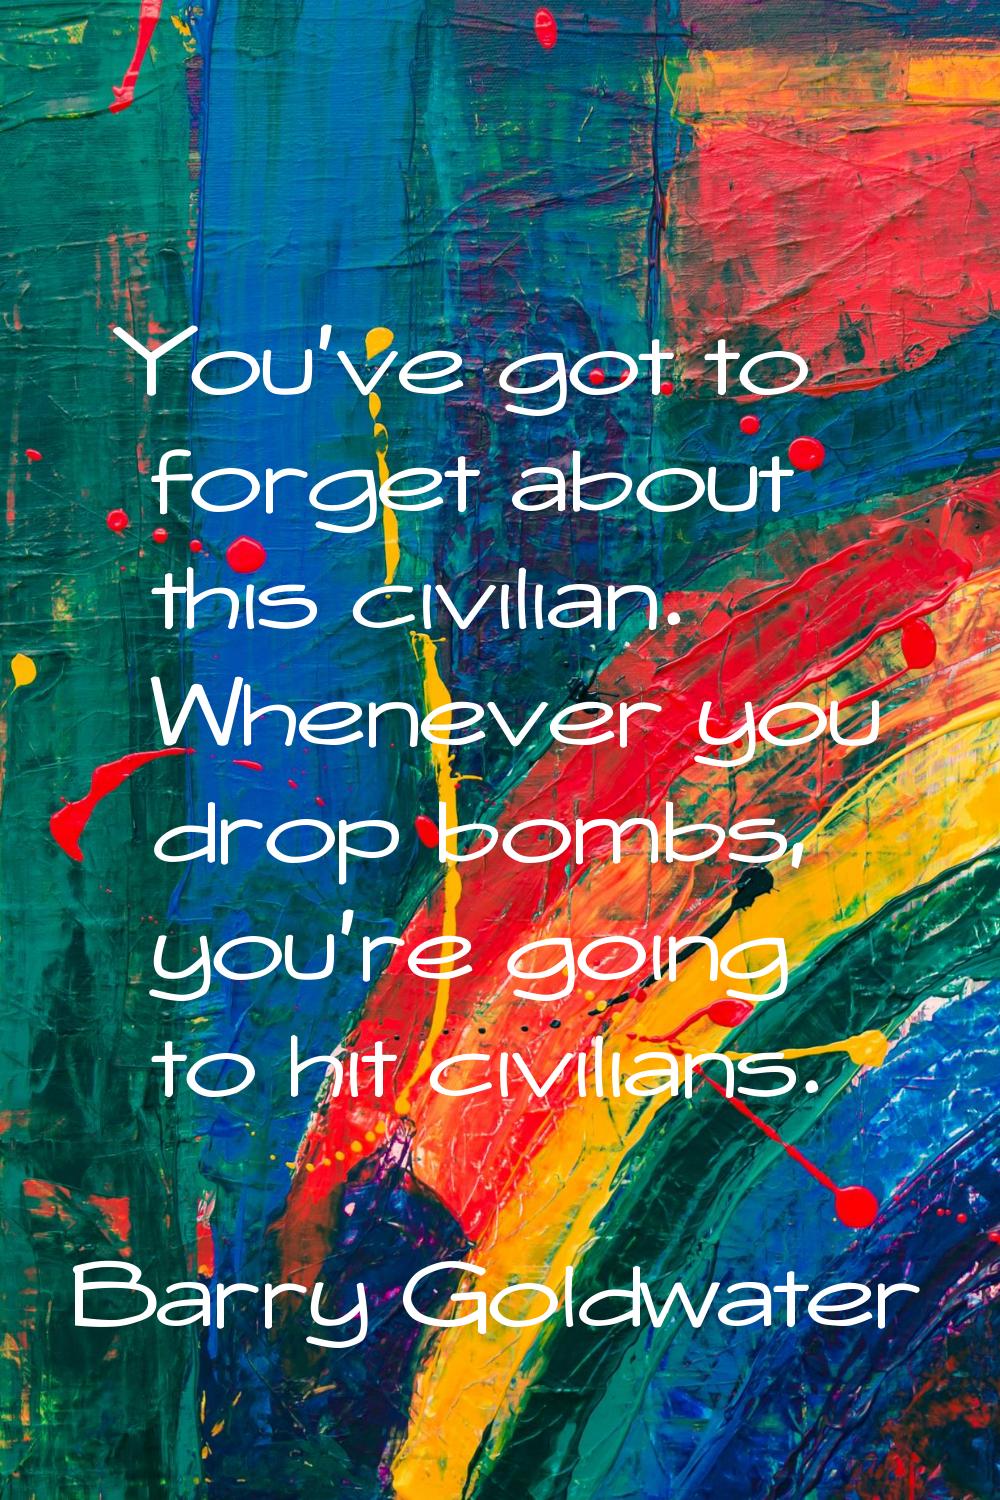 You've got to forget about this civilian. Whenever you drop bombs, you're going to hit civilians.